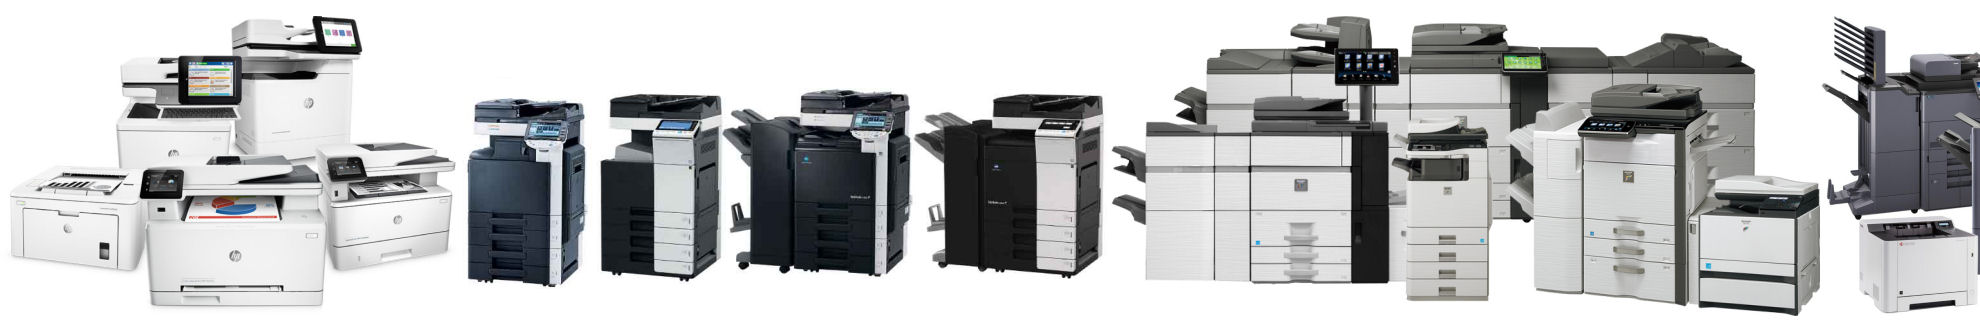 Multiple views of employees using multifunction print services